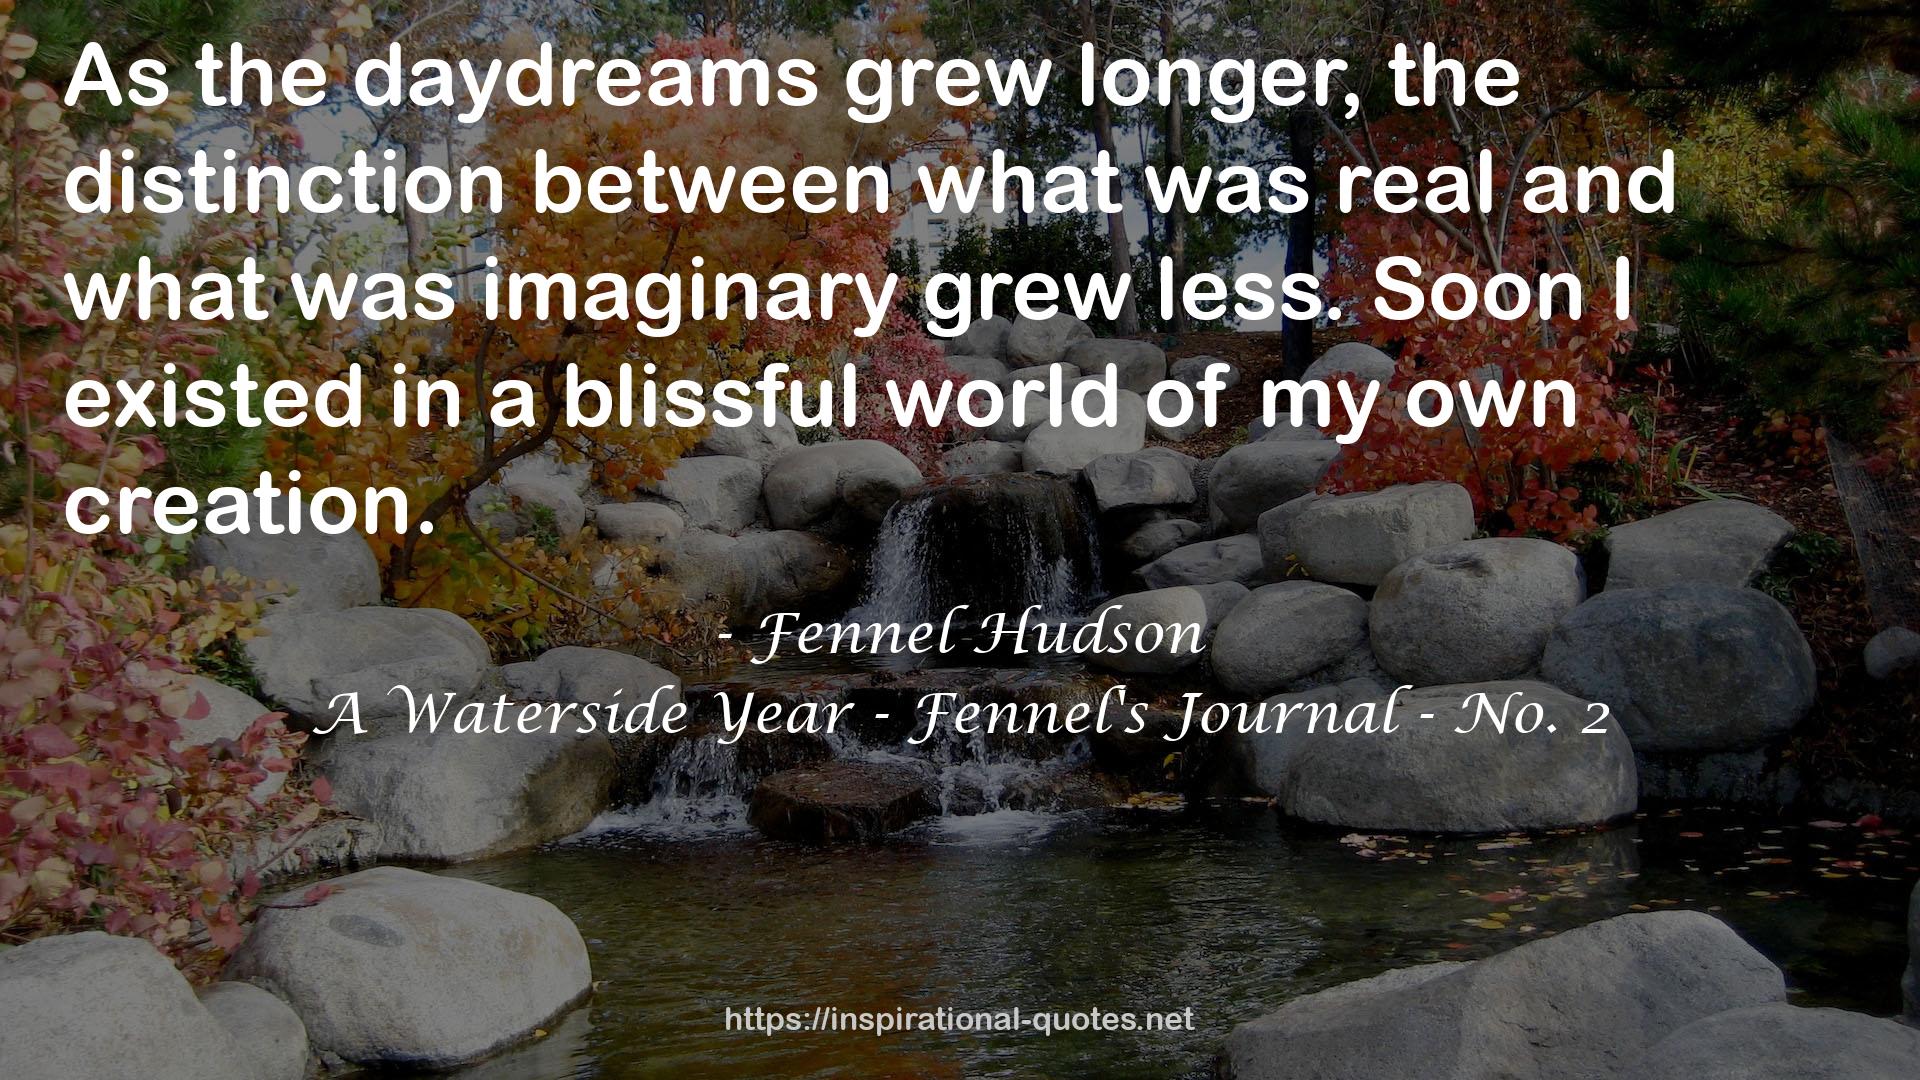 A Waterside Year - Fennel's Journal - No. 2 QUOTES